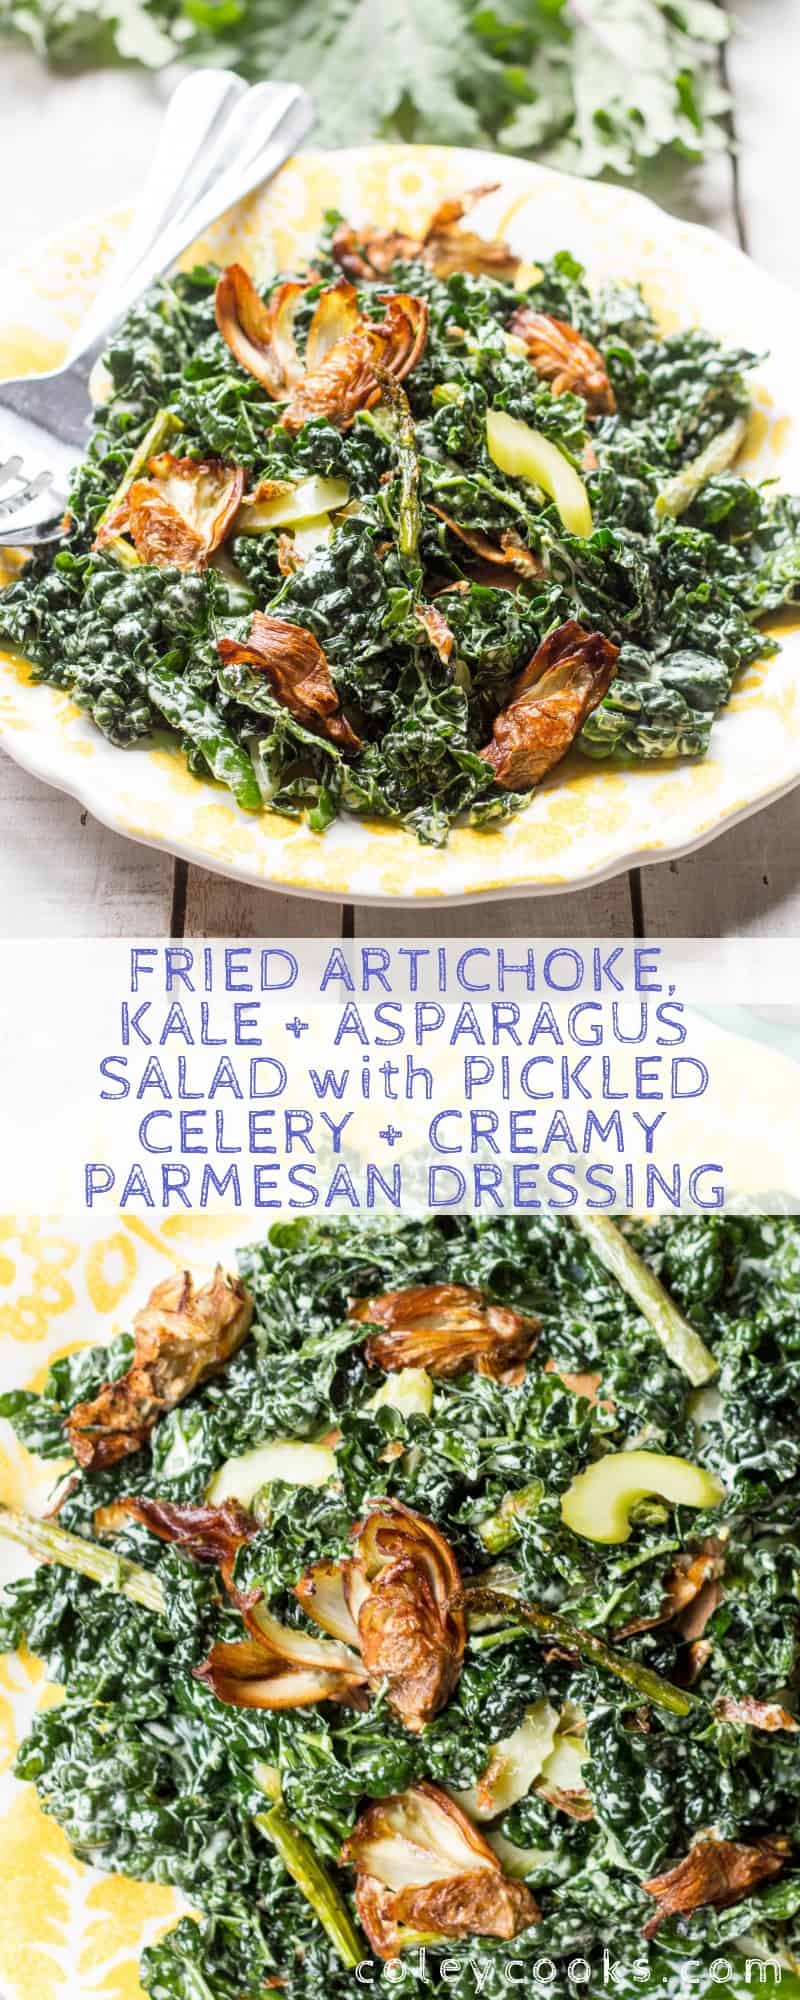 This incredibly unique salad pairs crispy fried artichokes, tender massaged kale, roasted asparagus, and quick pickled celery with a creamy parmesan dressing. GREAT for spring! #easy #spring #salad #recipe #vegetable #artichokes #kale #asparagus | ColeyCooks.com